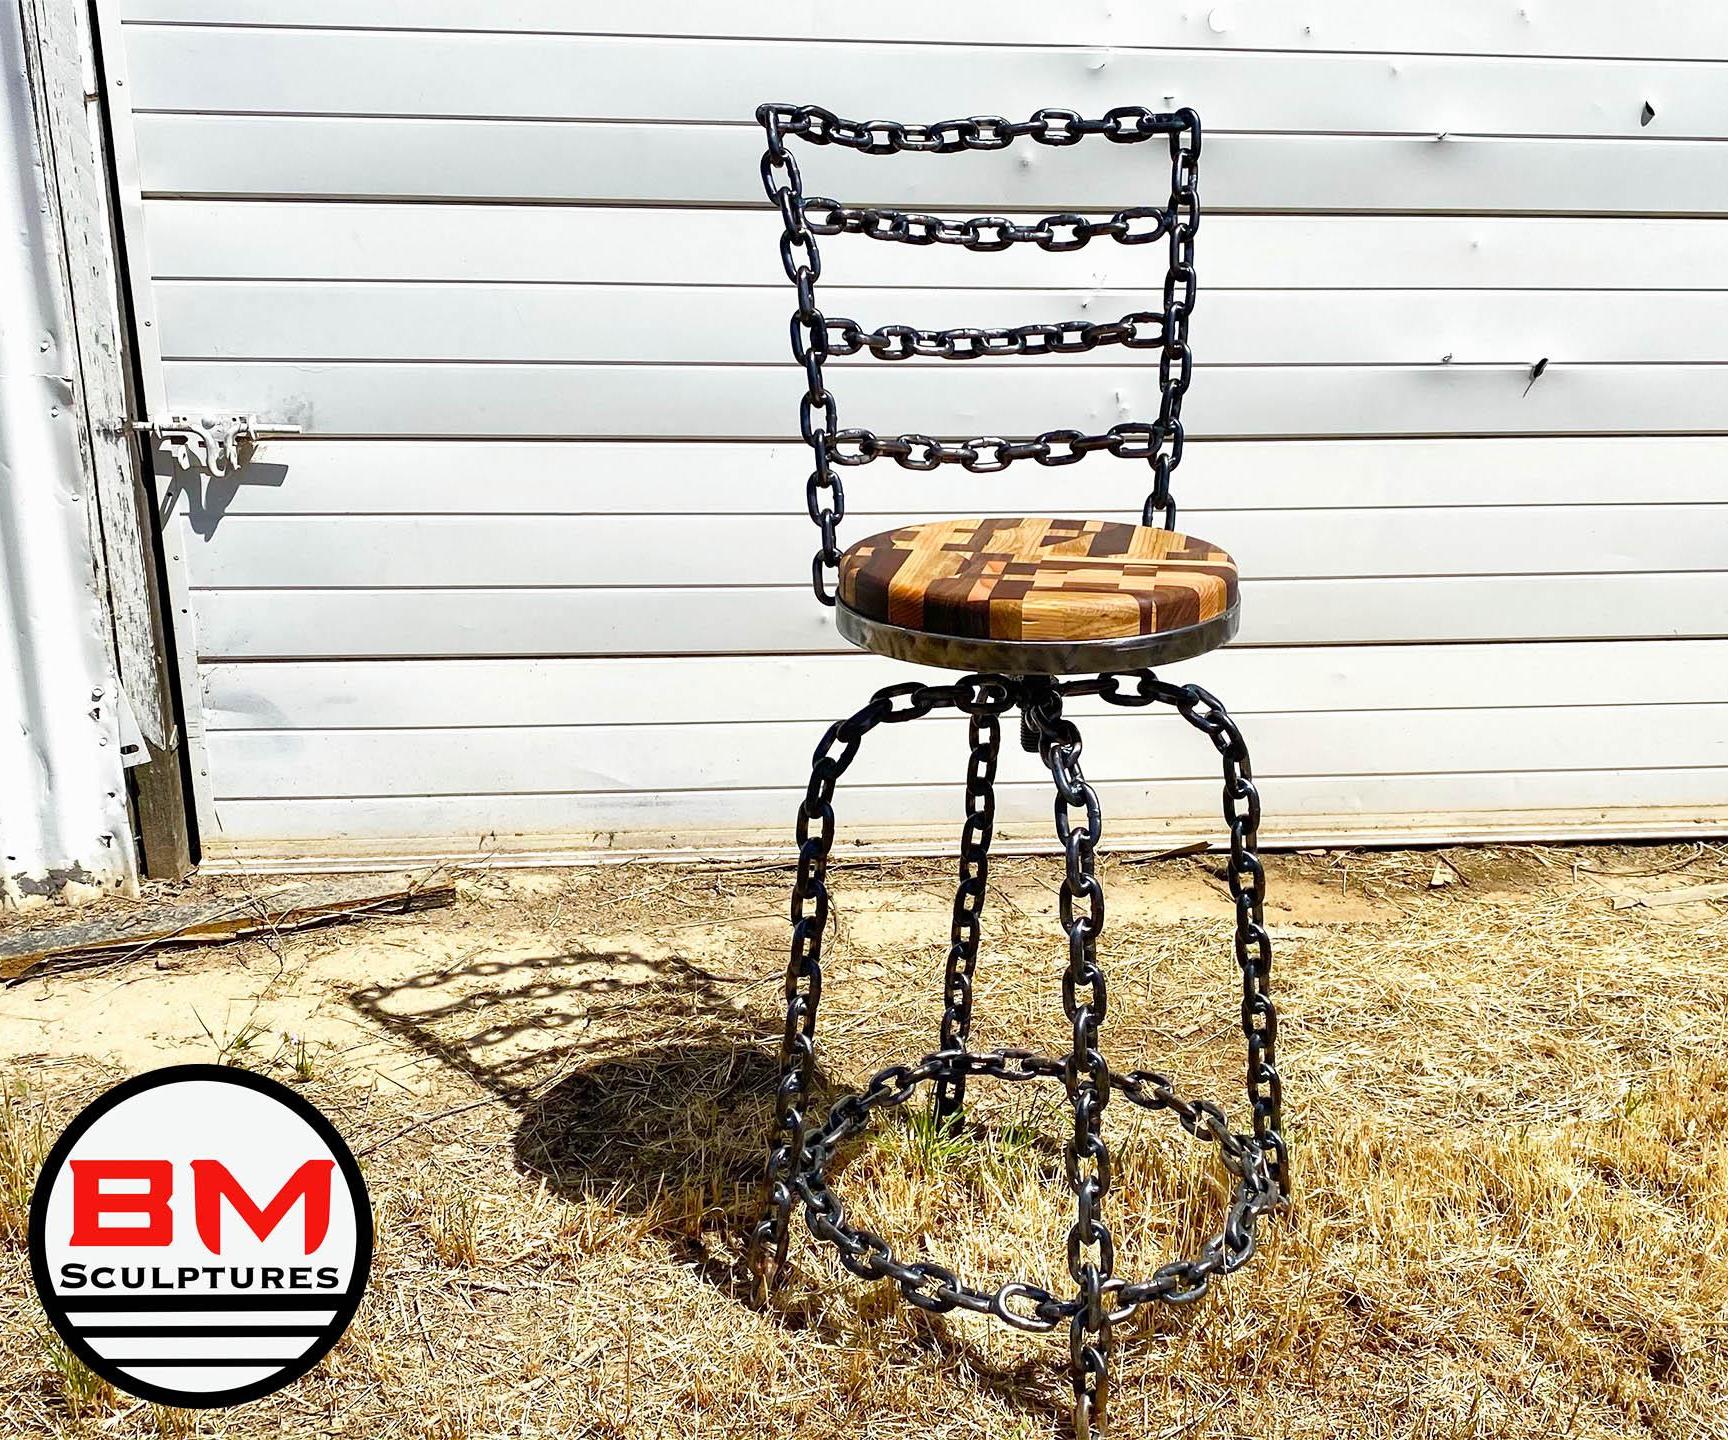 How I Made This Shop Chair Using Chain and Scrapwood